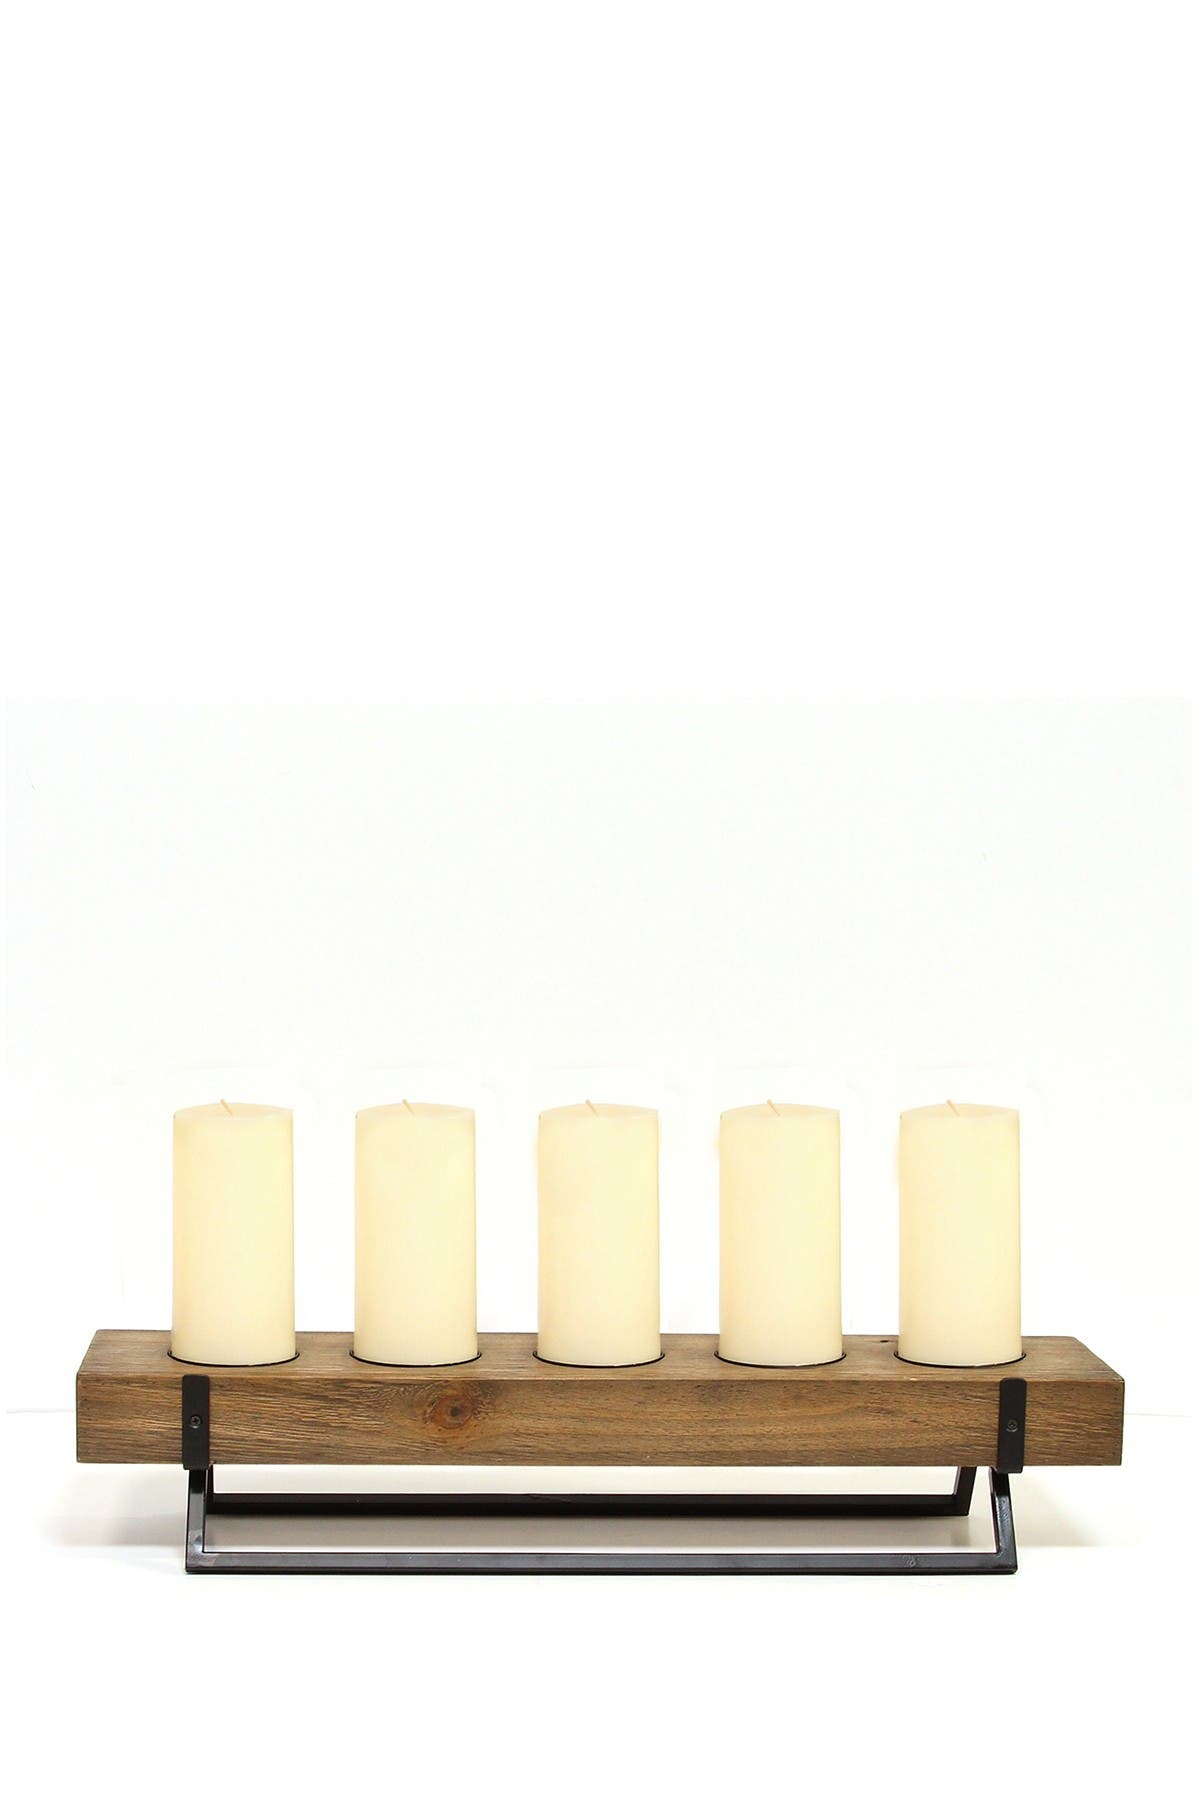 Stratton Home Natural Wood/black Rustic Candle Holder Centerpiece In Natural Wood/ Black